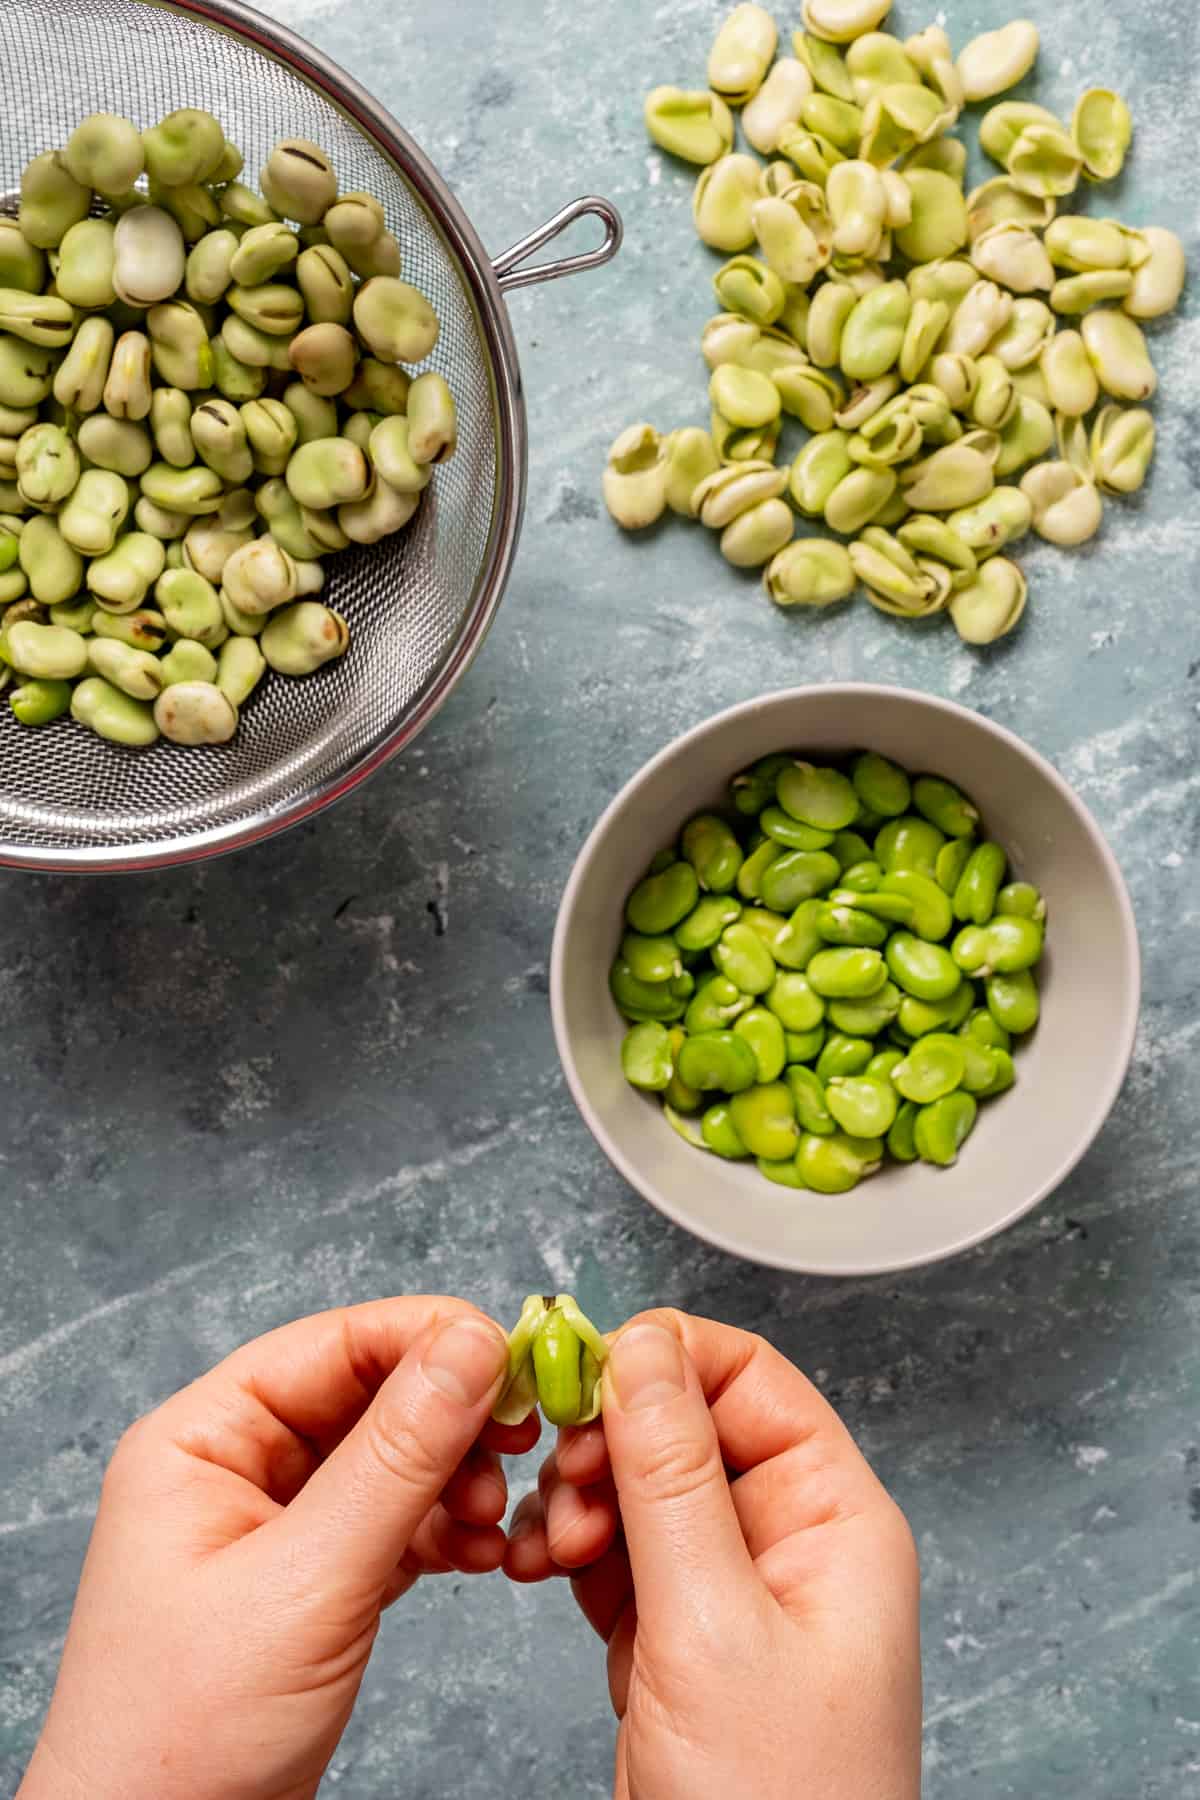 Hands shelling fava beans, shelled fava beans in a bowl, beans with their skin on in a strainer.